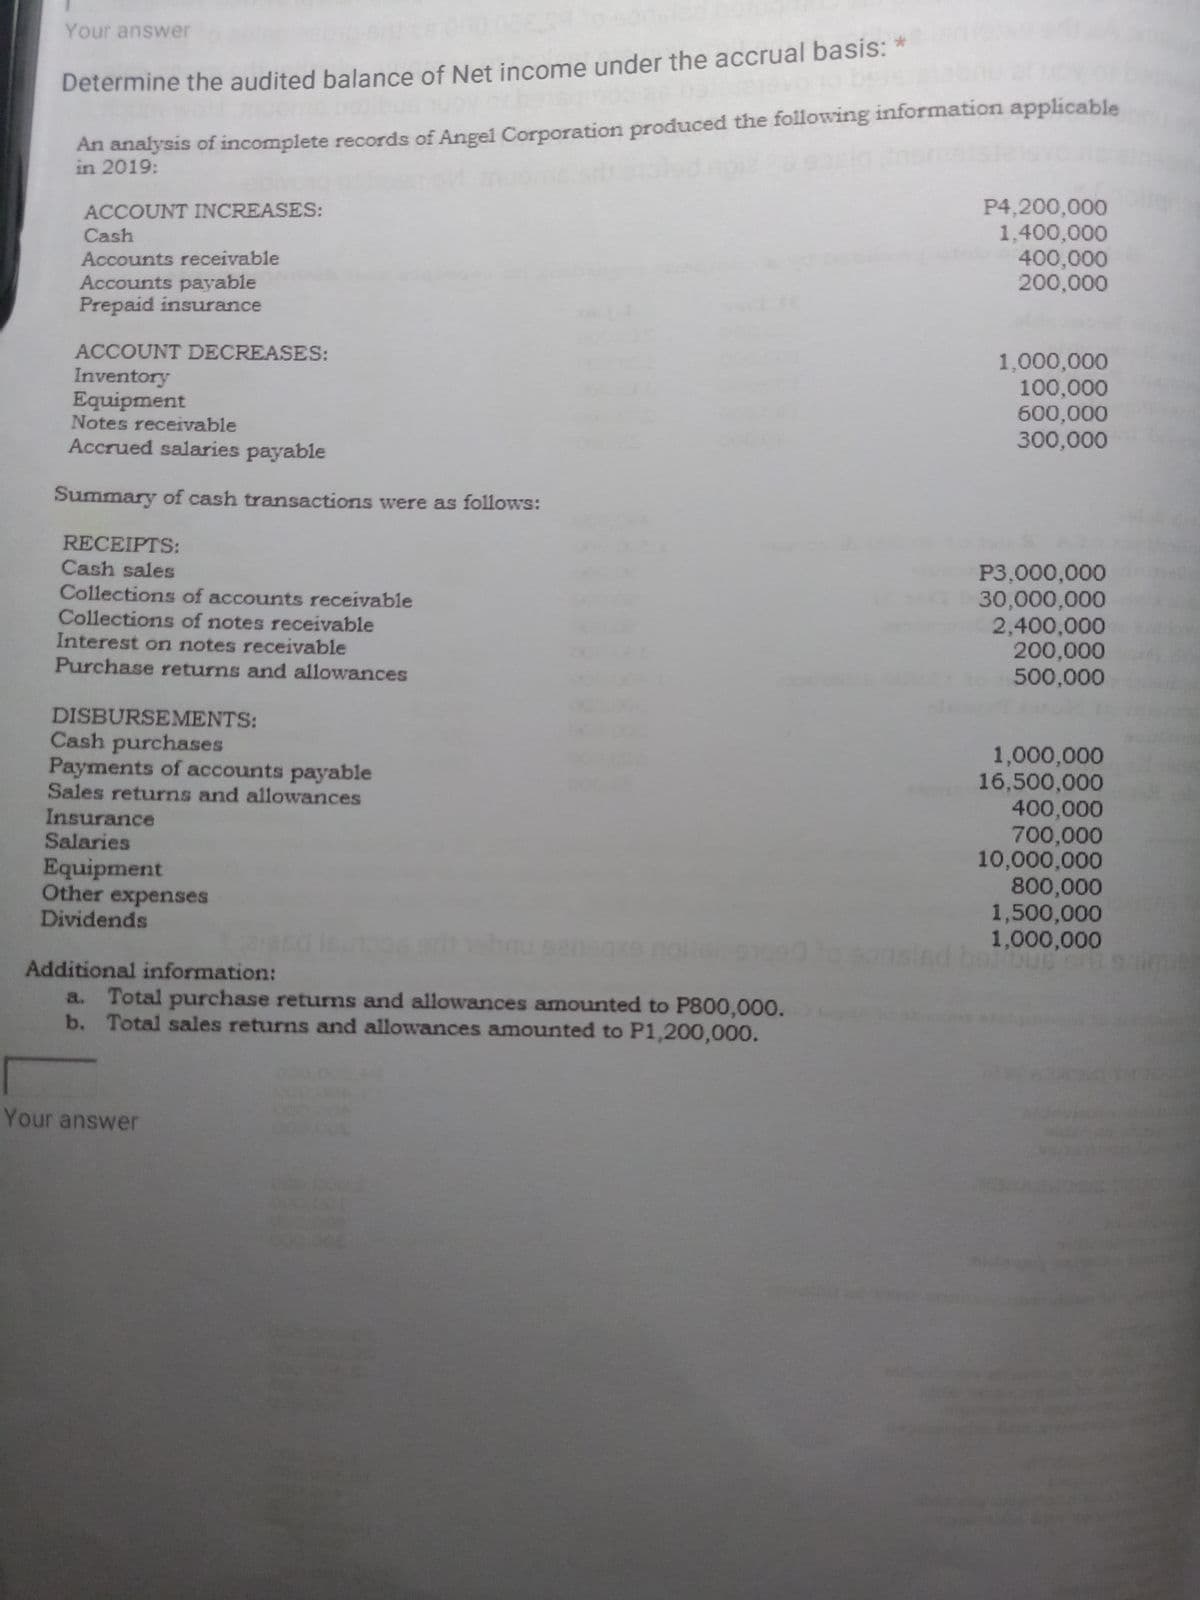 Your answer
Determine the audited balance of Net income under the accrual basis:
An analysis of incomplete records of Angel Corporation produced the following information applicable
in 2019:
P4,200,000
1,400,000
400,000
200,000
ACCOUNT INCREASES:
Cash
Accounts receivable
Accounts payable
Prepaid insurance
ACCOUNT DECREASES:
Inventory
Equipment
Notes receivable
Accrued salaries payable
1,000,000
100,000
600,000
300,000
Summary of cash transactions were as follows:
RECEIPTS:
Cash sales
Collections of accounts receivable
Collections of notes receivable
Interest on notes receivable
Purchase returns and allowances
P3,000,000
30,000,000
2,400,000
200,000
500,000
DISBURSEMENTS:
Cash purchases
Payments of accounts payable
Sales returns and allowances
1,000,000
16,500,000
400,000
700,000
10,000,000
800,000
1,500,000
1,000,000
Insurance
Salaries
Equipment
Other expenses
Dividends
Additional information:
a. Total purchase returns and allowances amounted to P800,000.
b. Total sales returns and allowances amounted to P1,200,000.
Your answer
